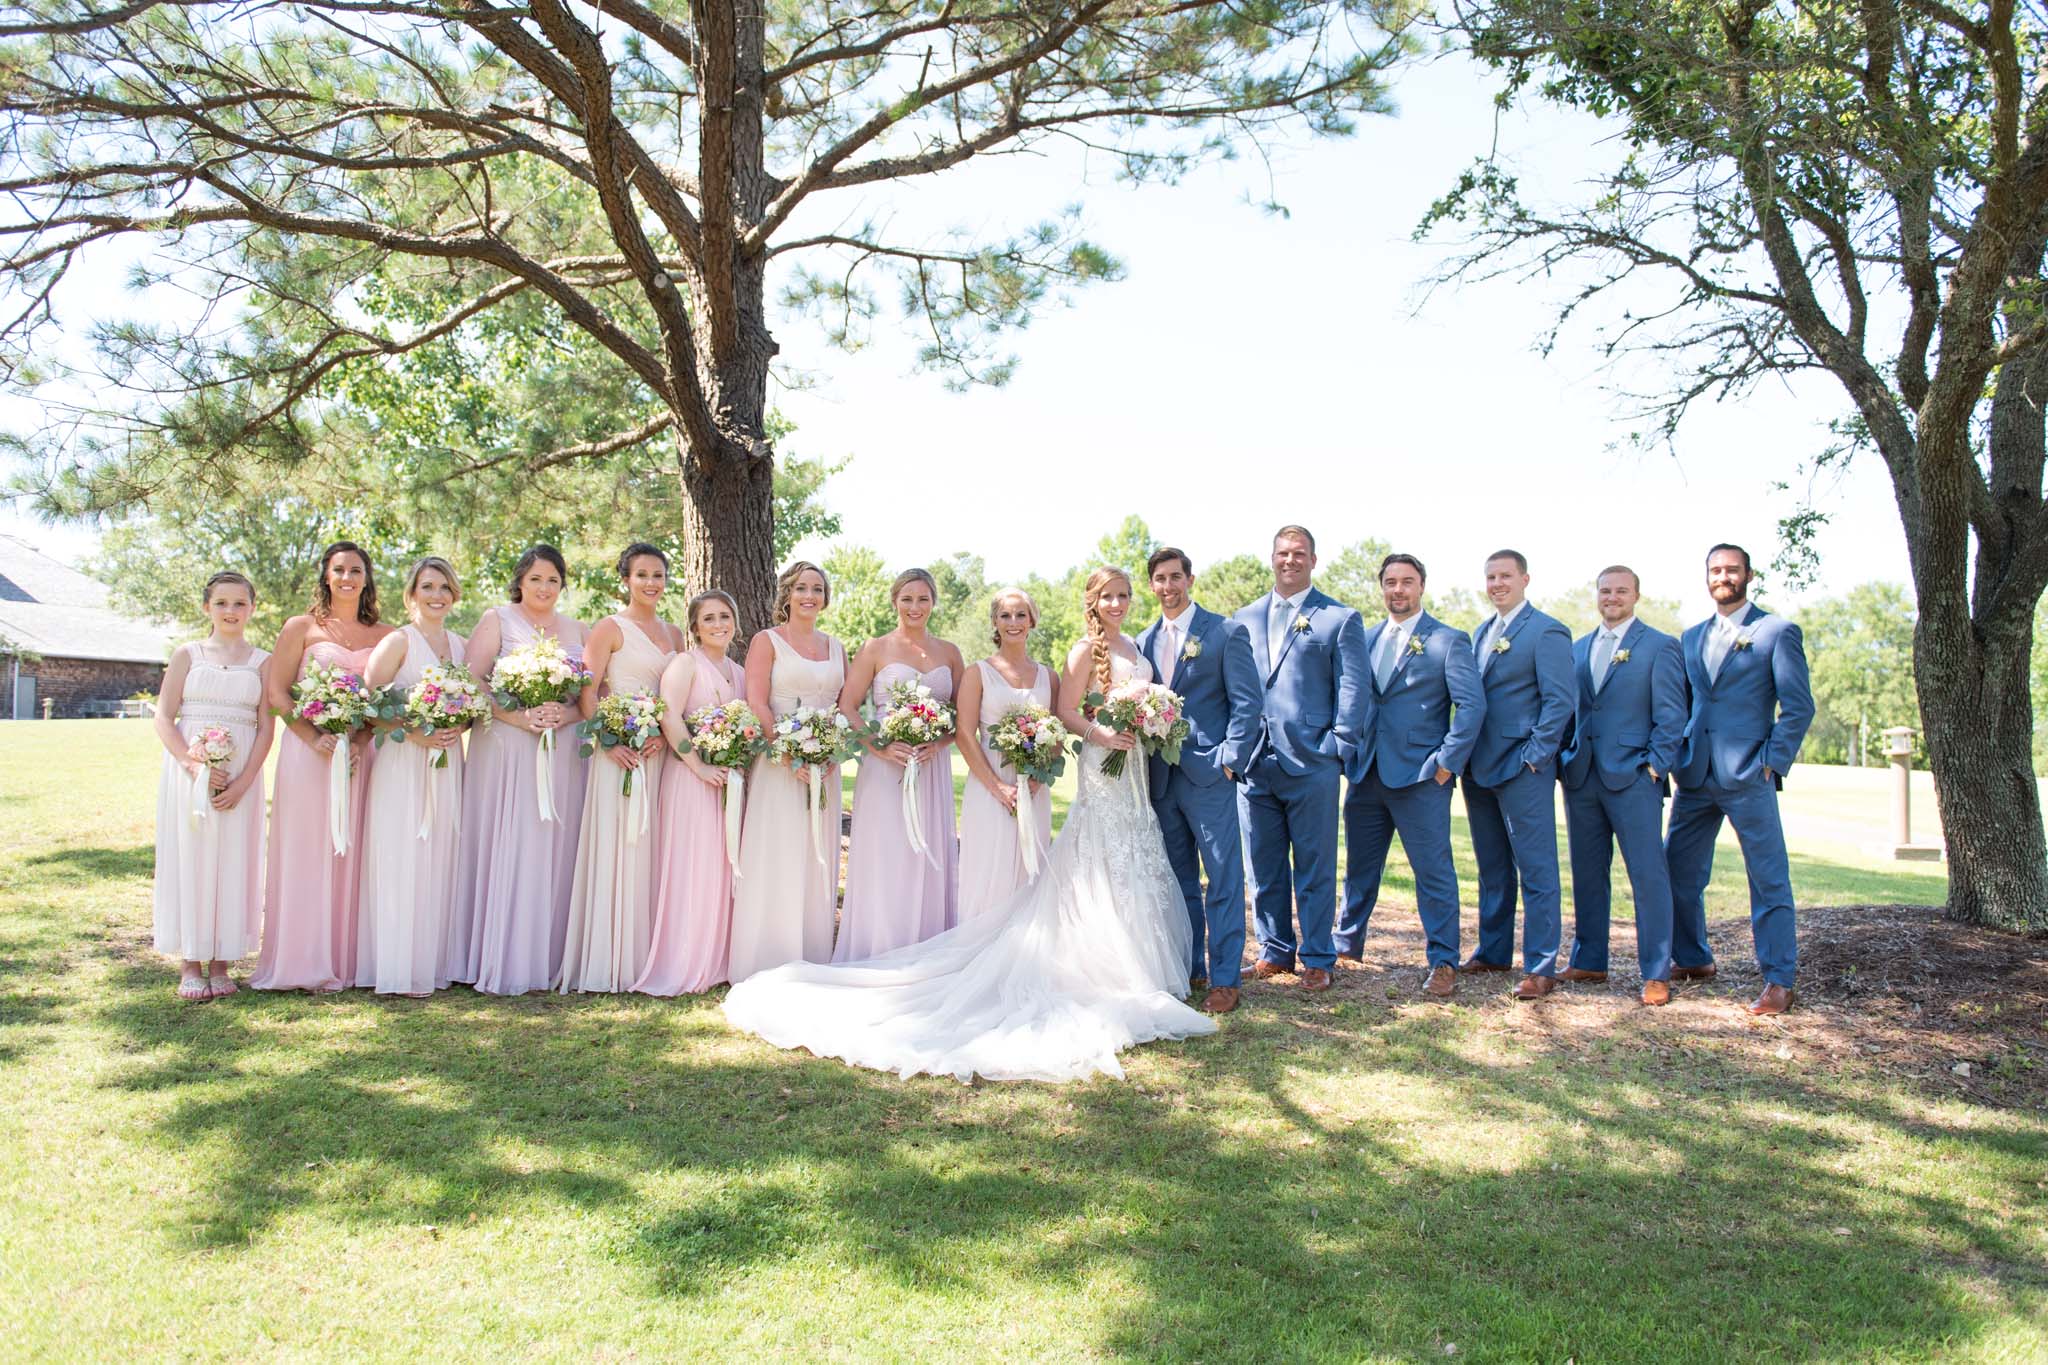 Shannon & Logan | Southern Hospitality Weddings & Events